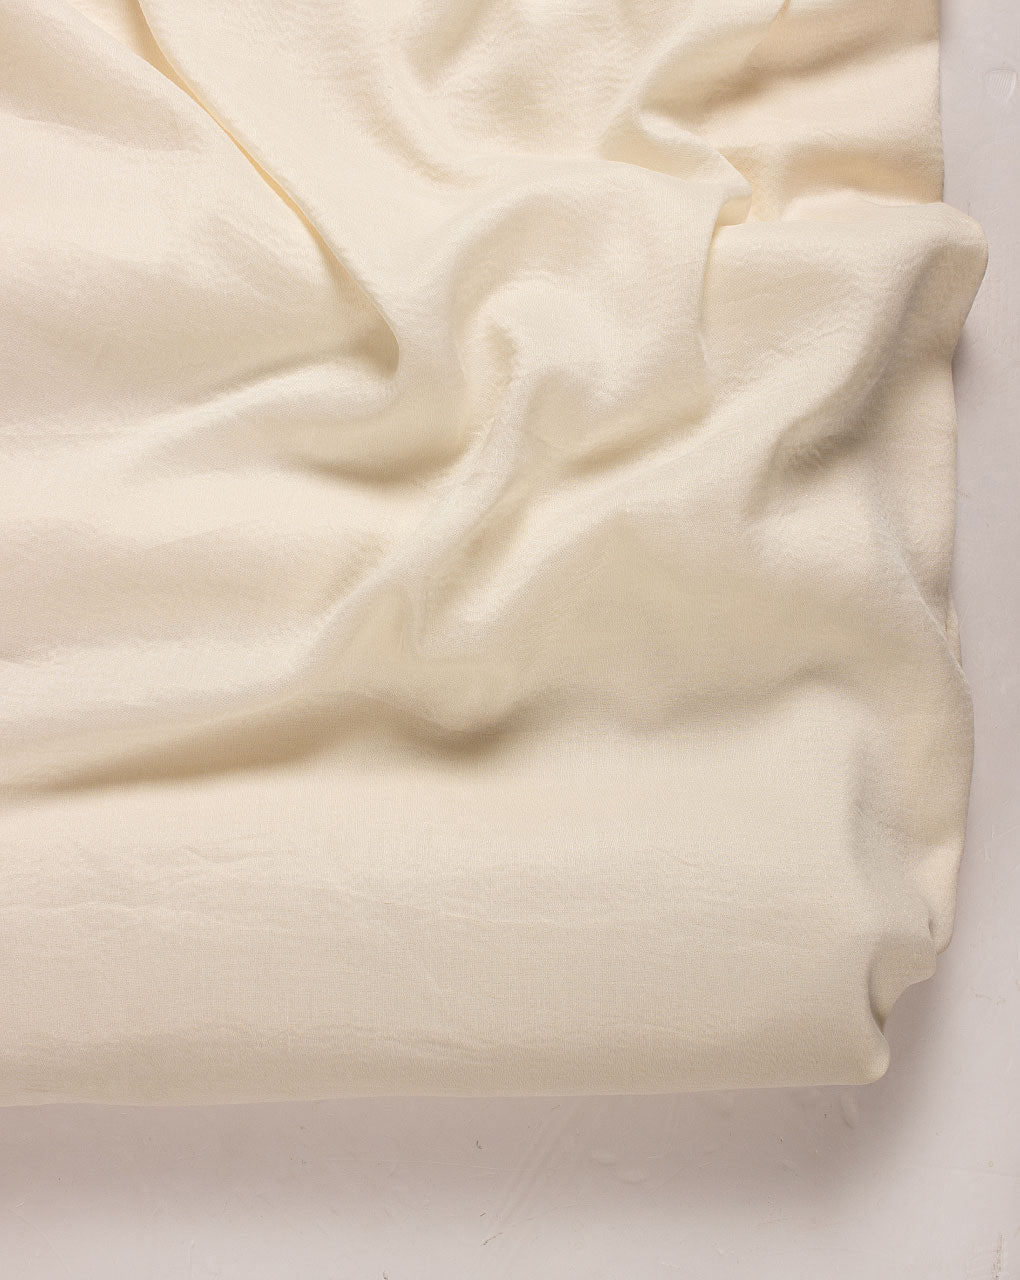 Dyeable Liva VFY Shimmer Modal ( Muslin Shimmer Heavy ) Fabric - Fabriclore.com